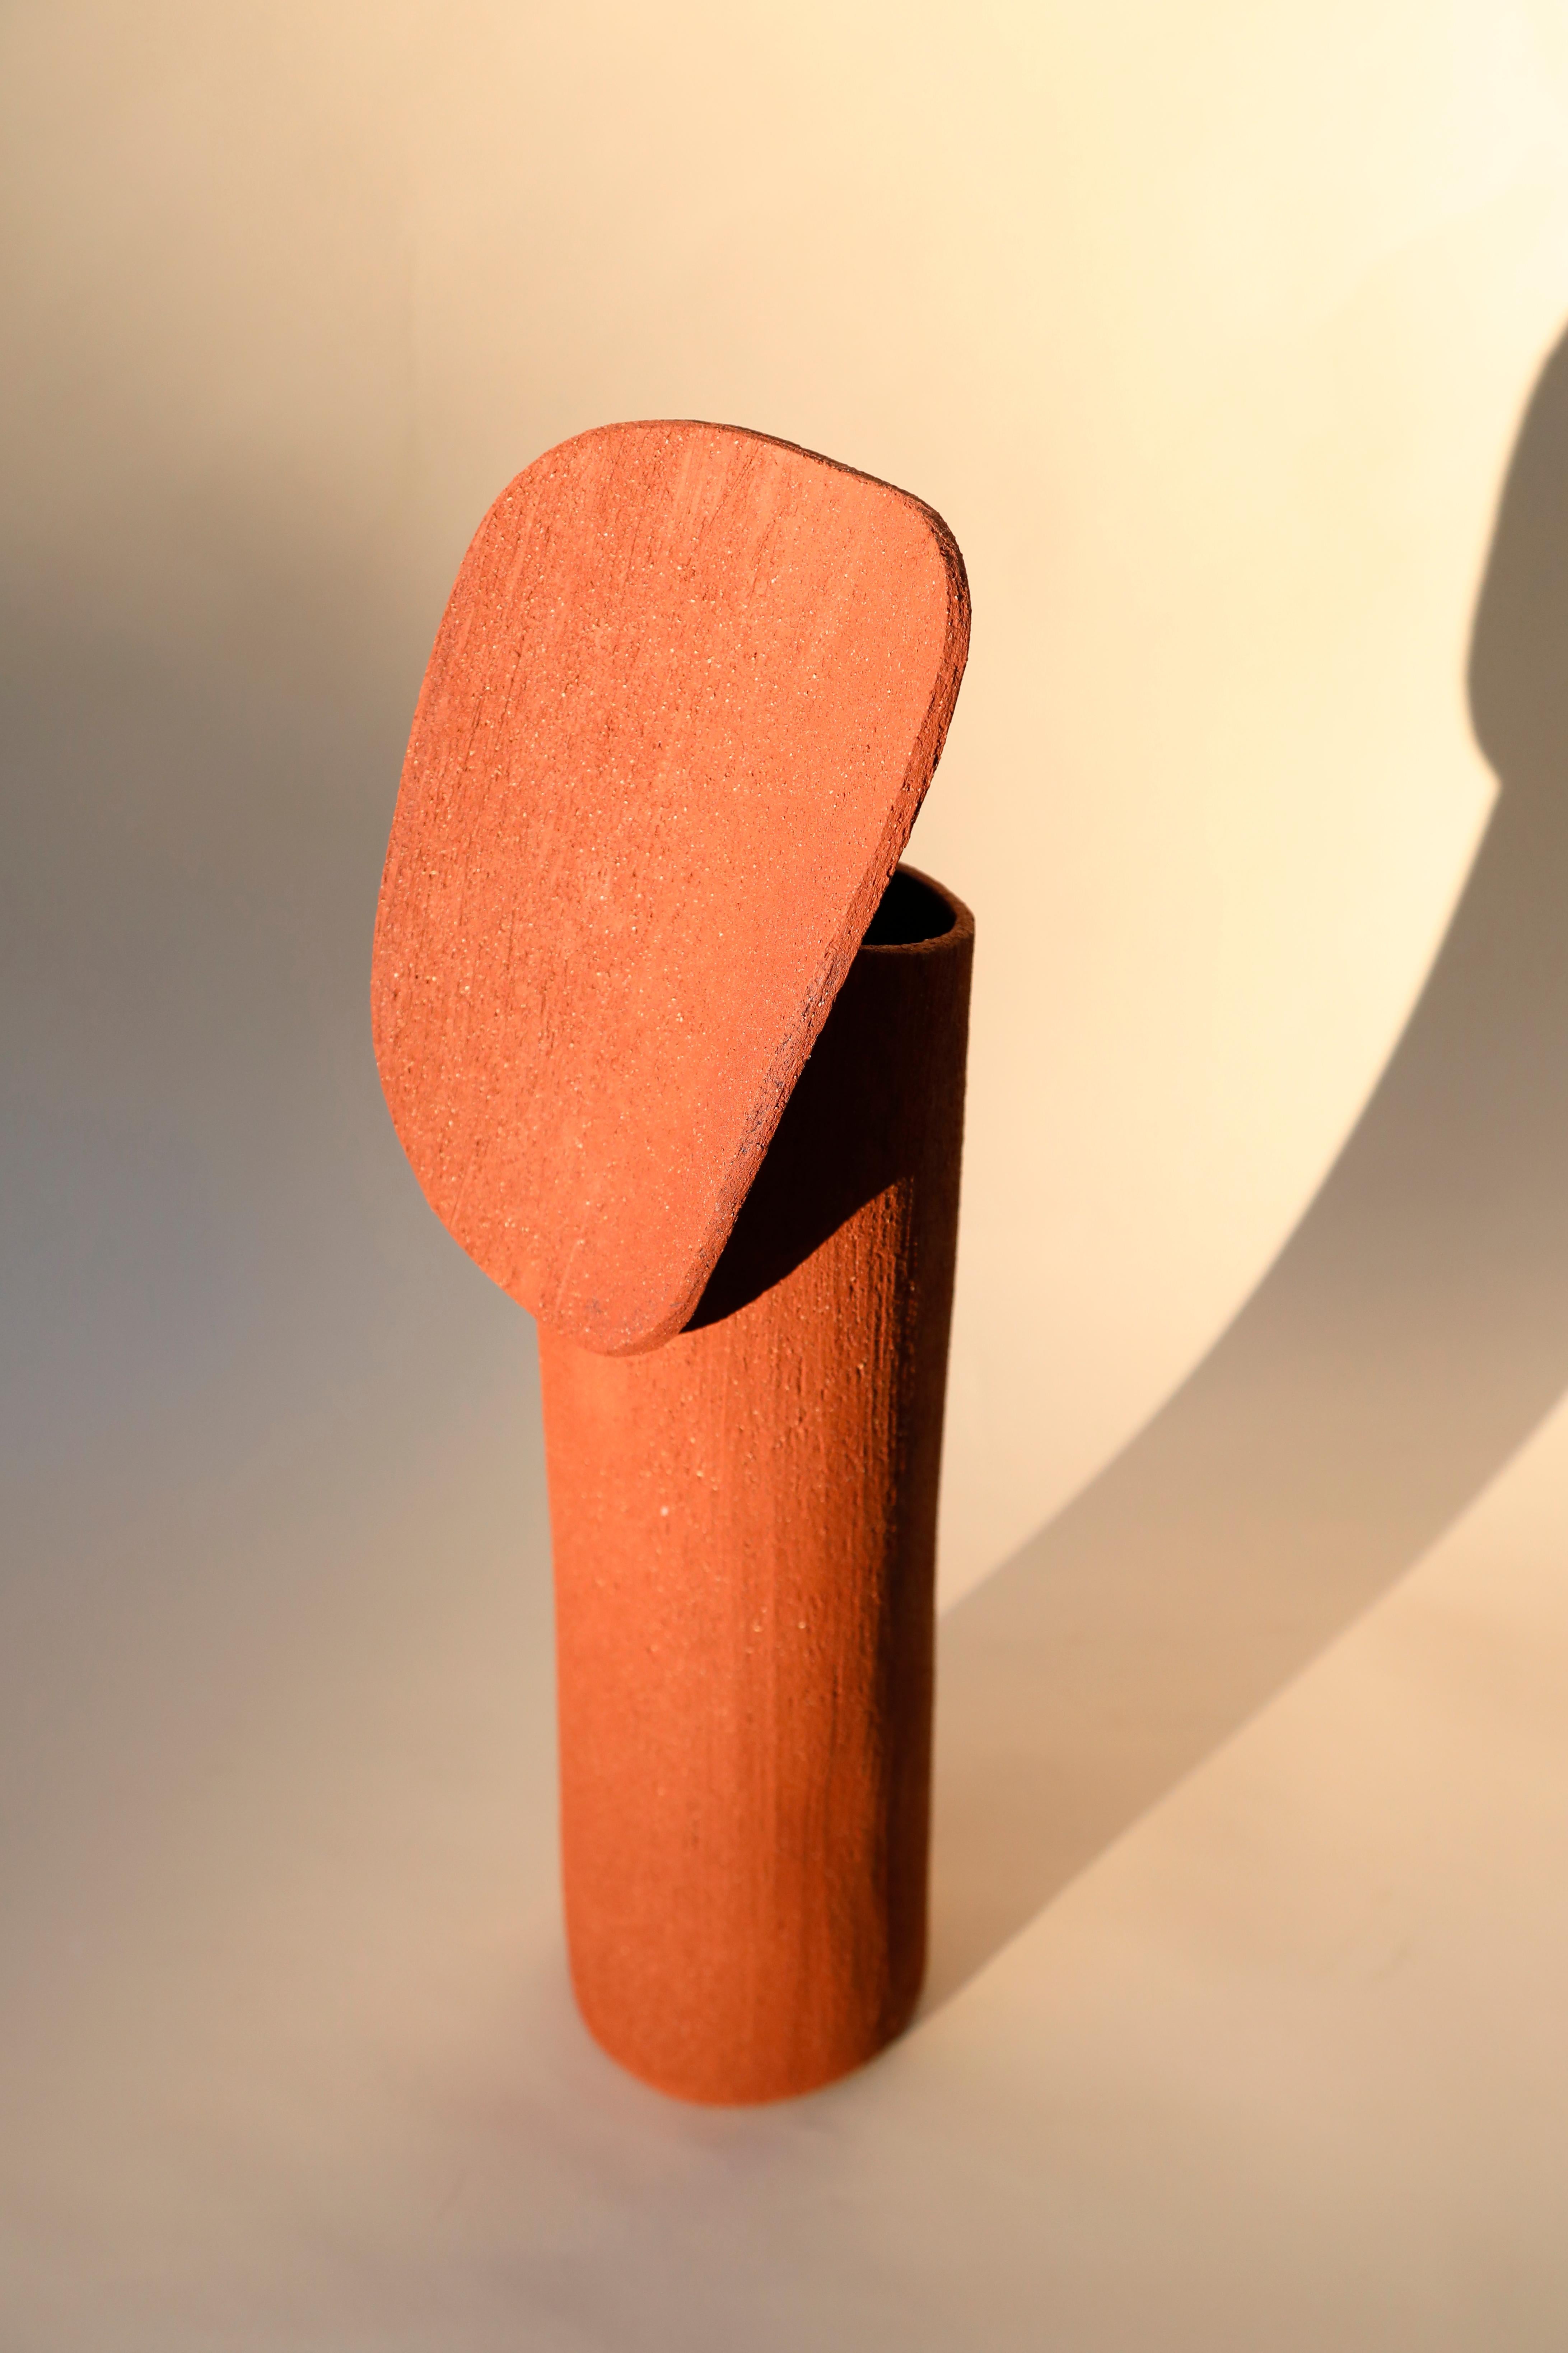 Terra cotta large Totem by Olivia Cognet
Materials: Red clay
Dimensions: H around 55-60 cm

Totem
Vases, lamps and sculptures with graphic forms, made from red clay that gives them a rough look..

Each of Olivia’s handmade creations is a